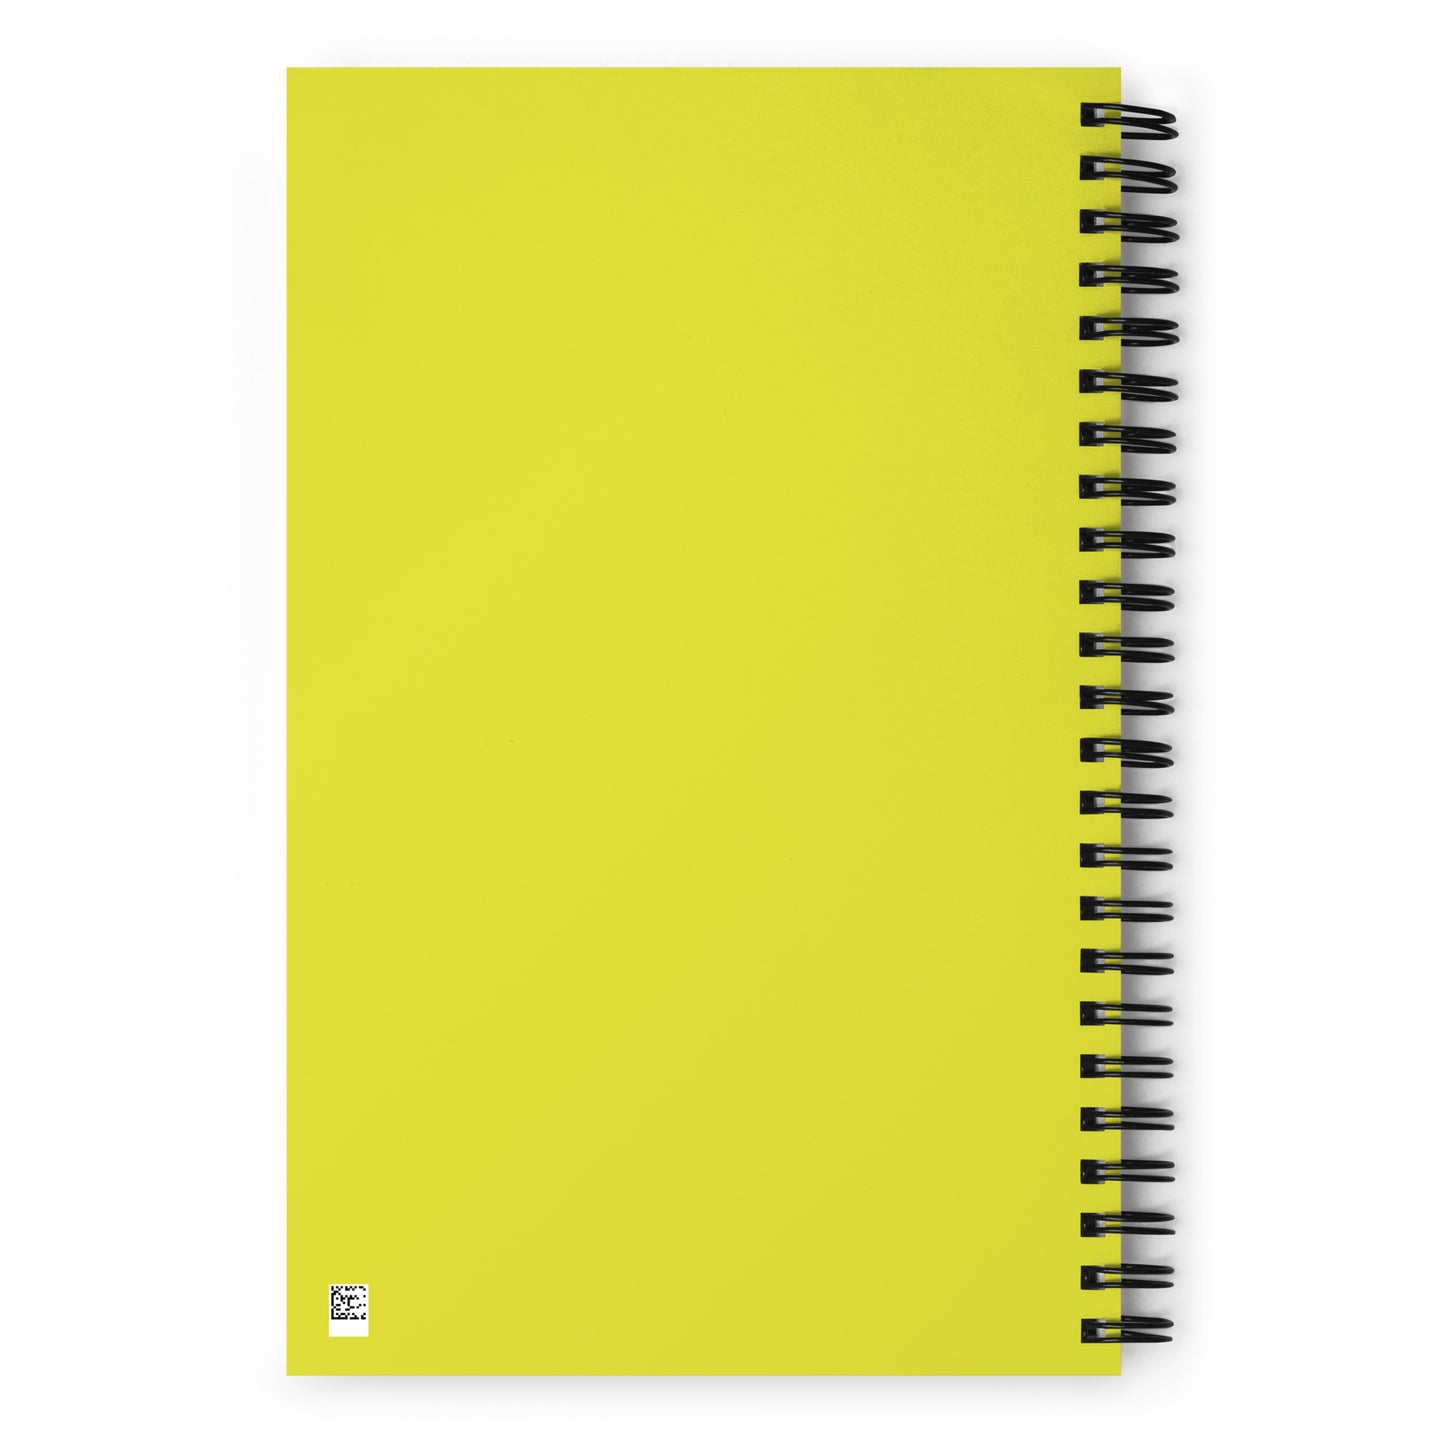 Aviation Gift Spiral Notebook - Yellow • ORD Chicago • YHM Designs - Image 02